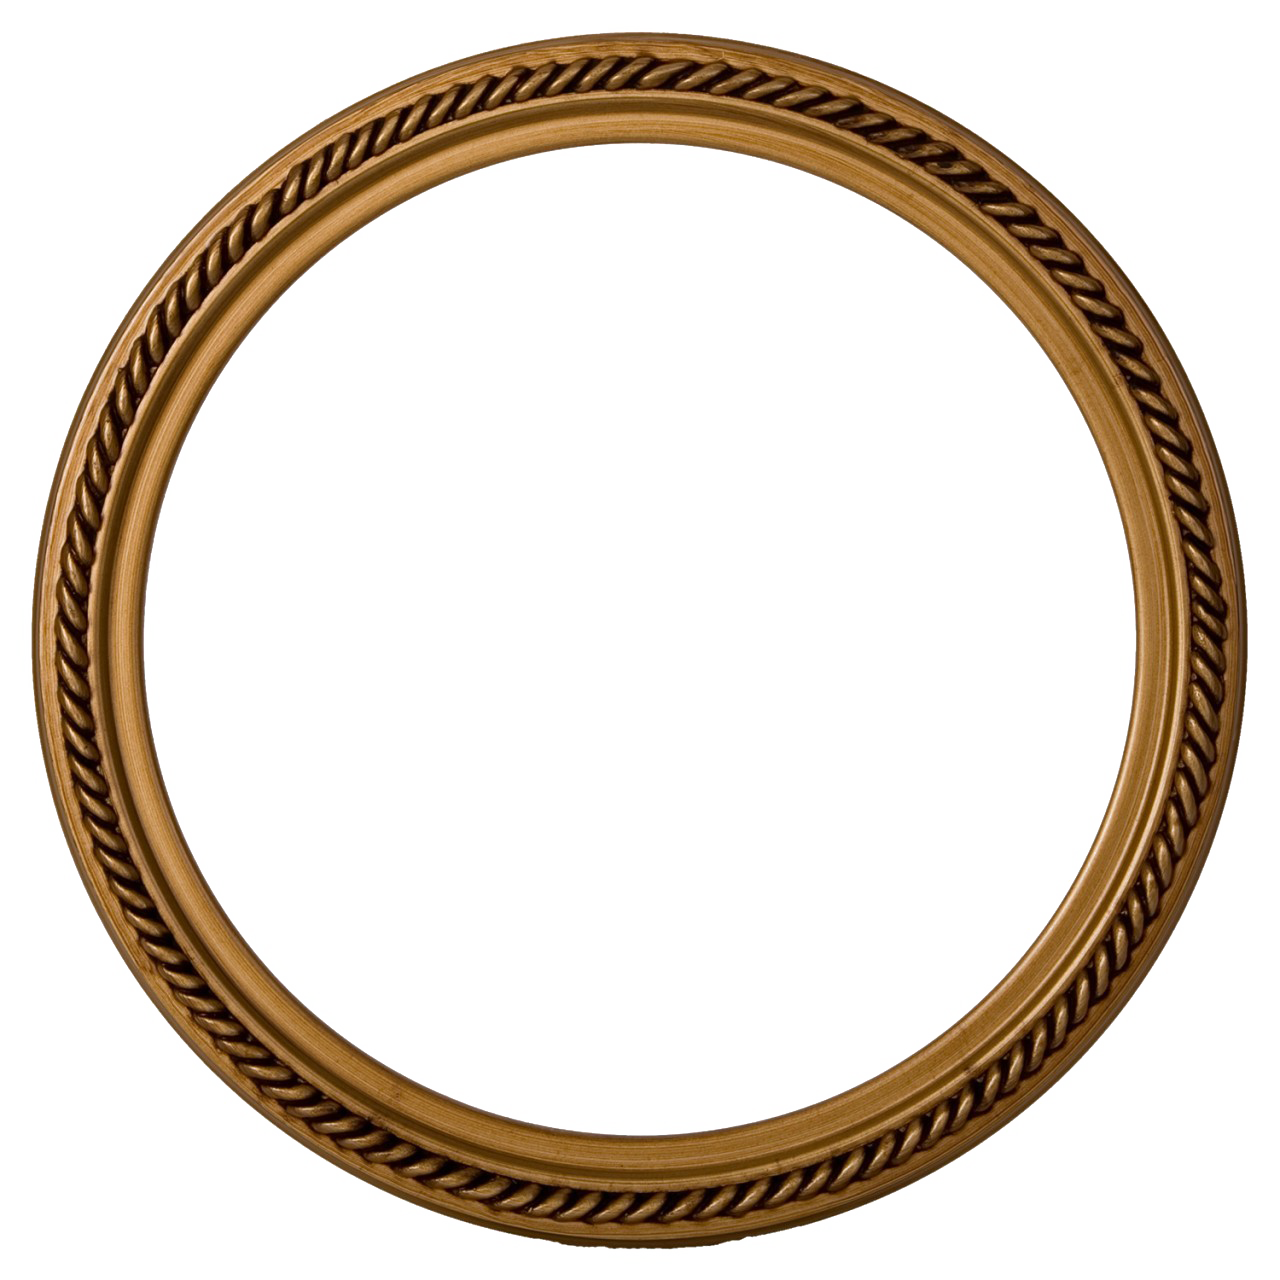 Golden Round Frame PNG High Quality Image